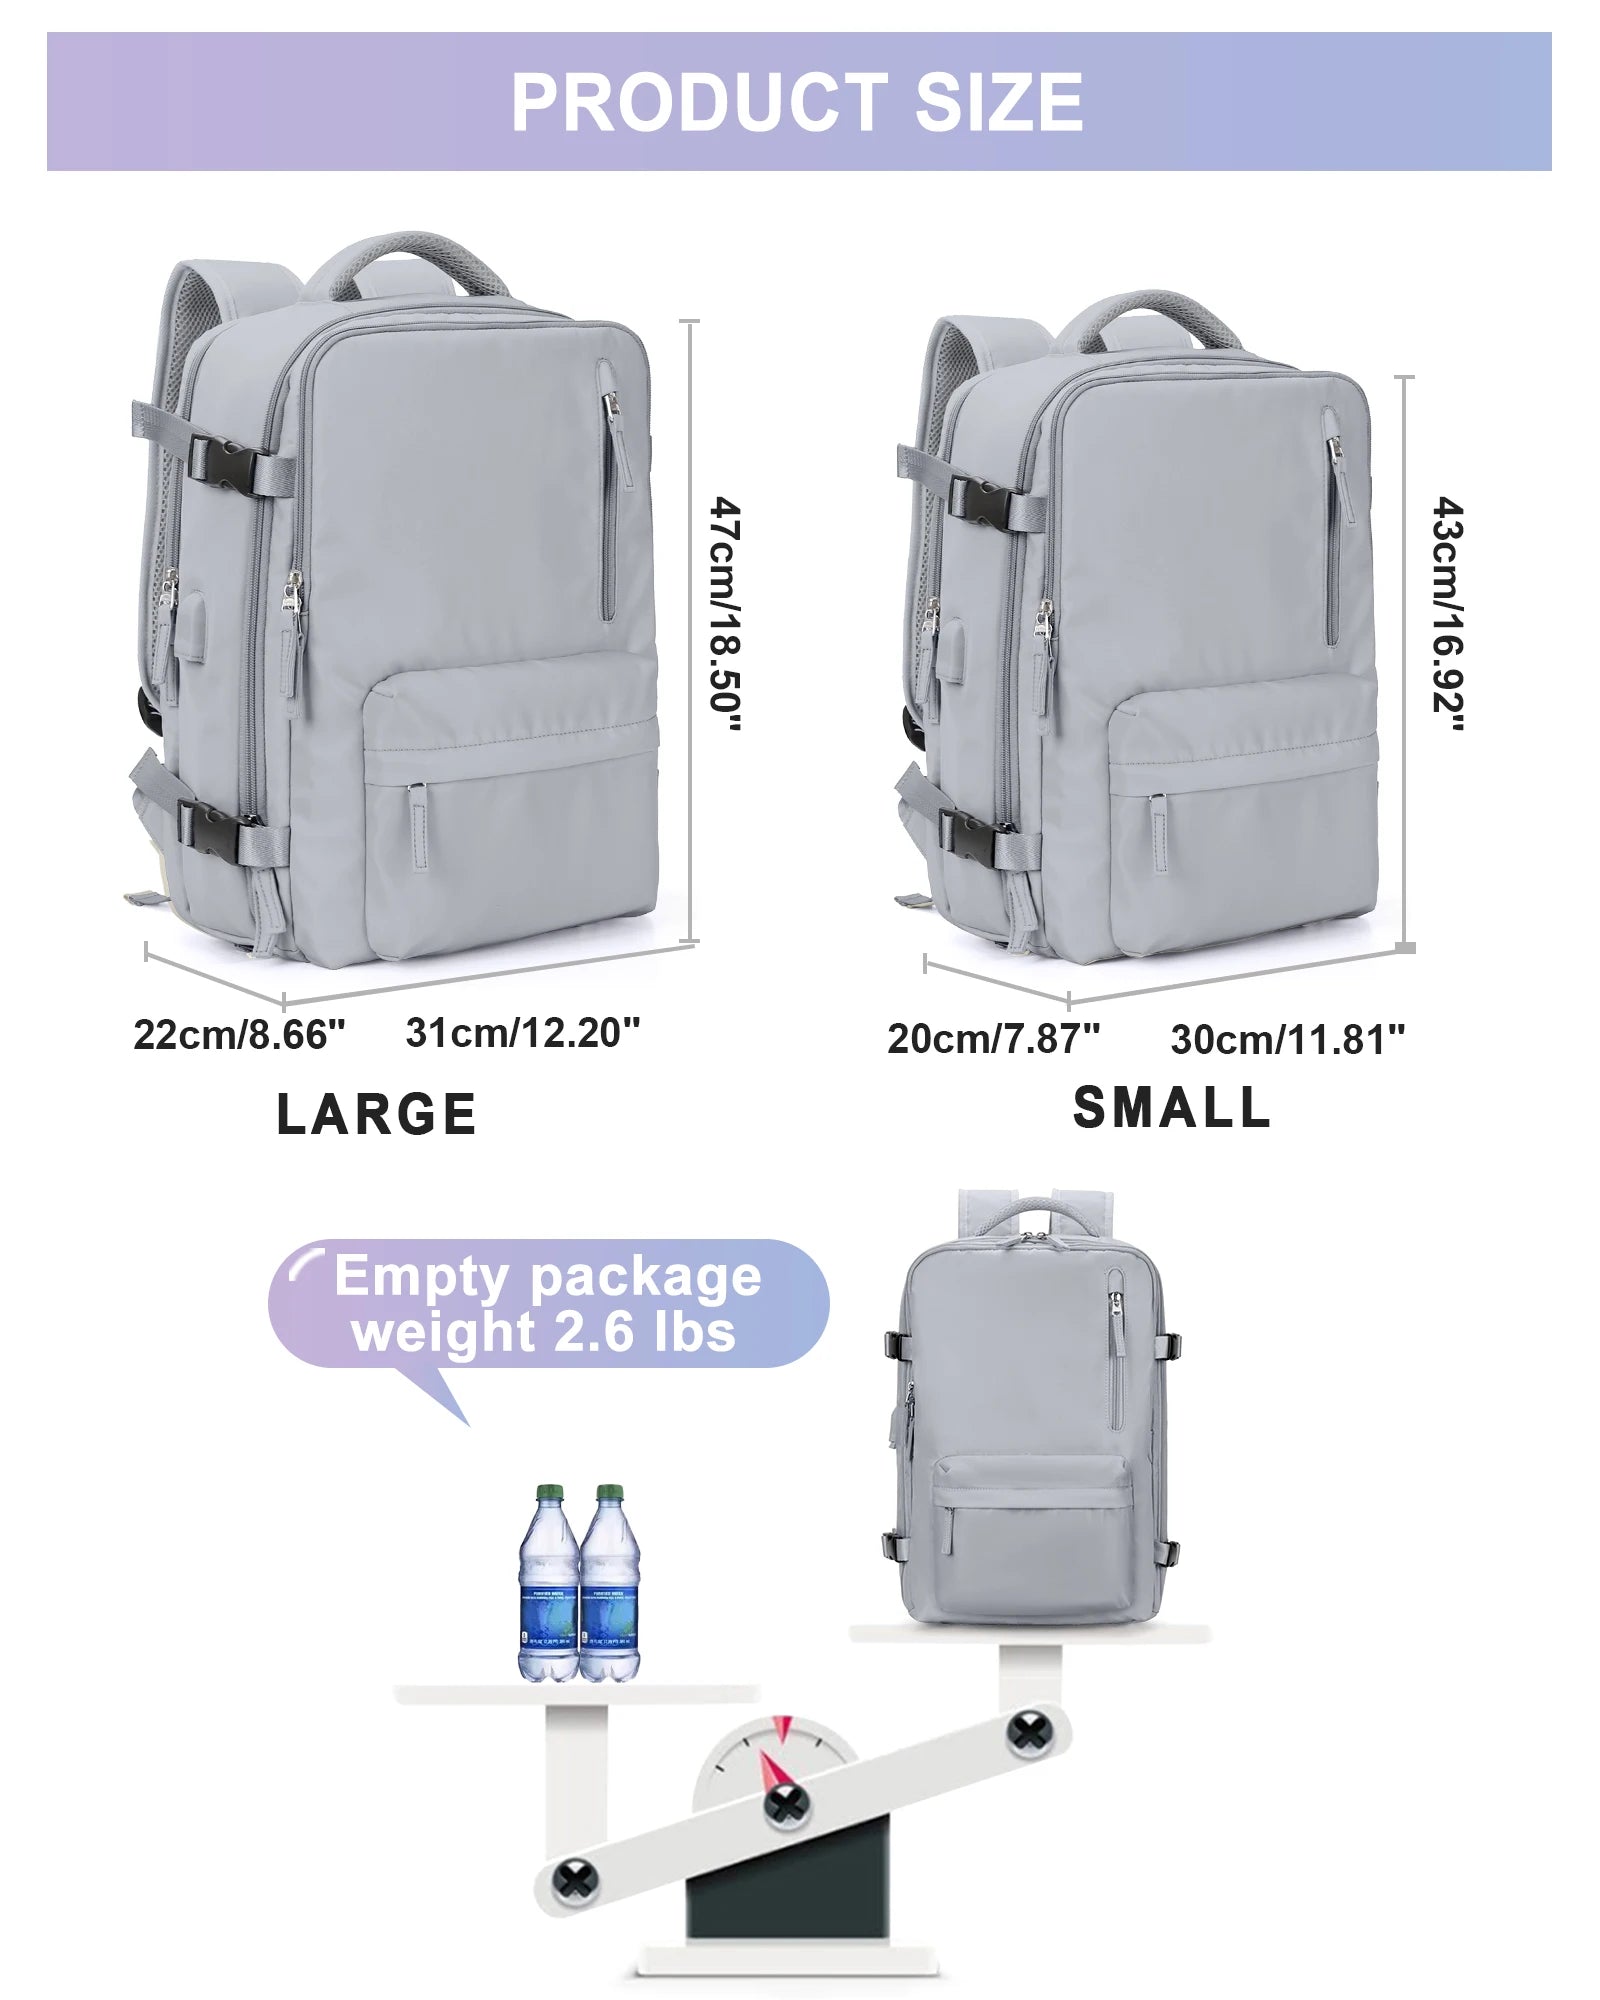 Sleek Business Travel Backpack with USB Port